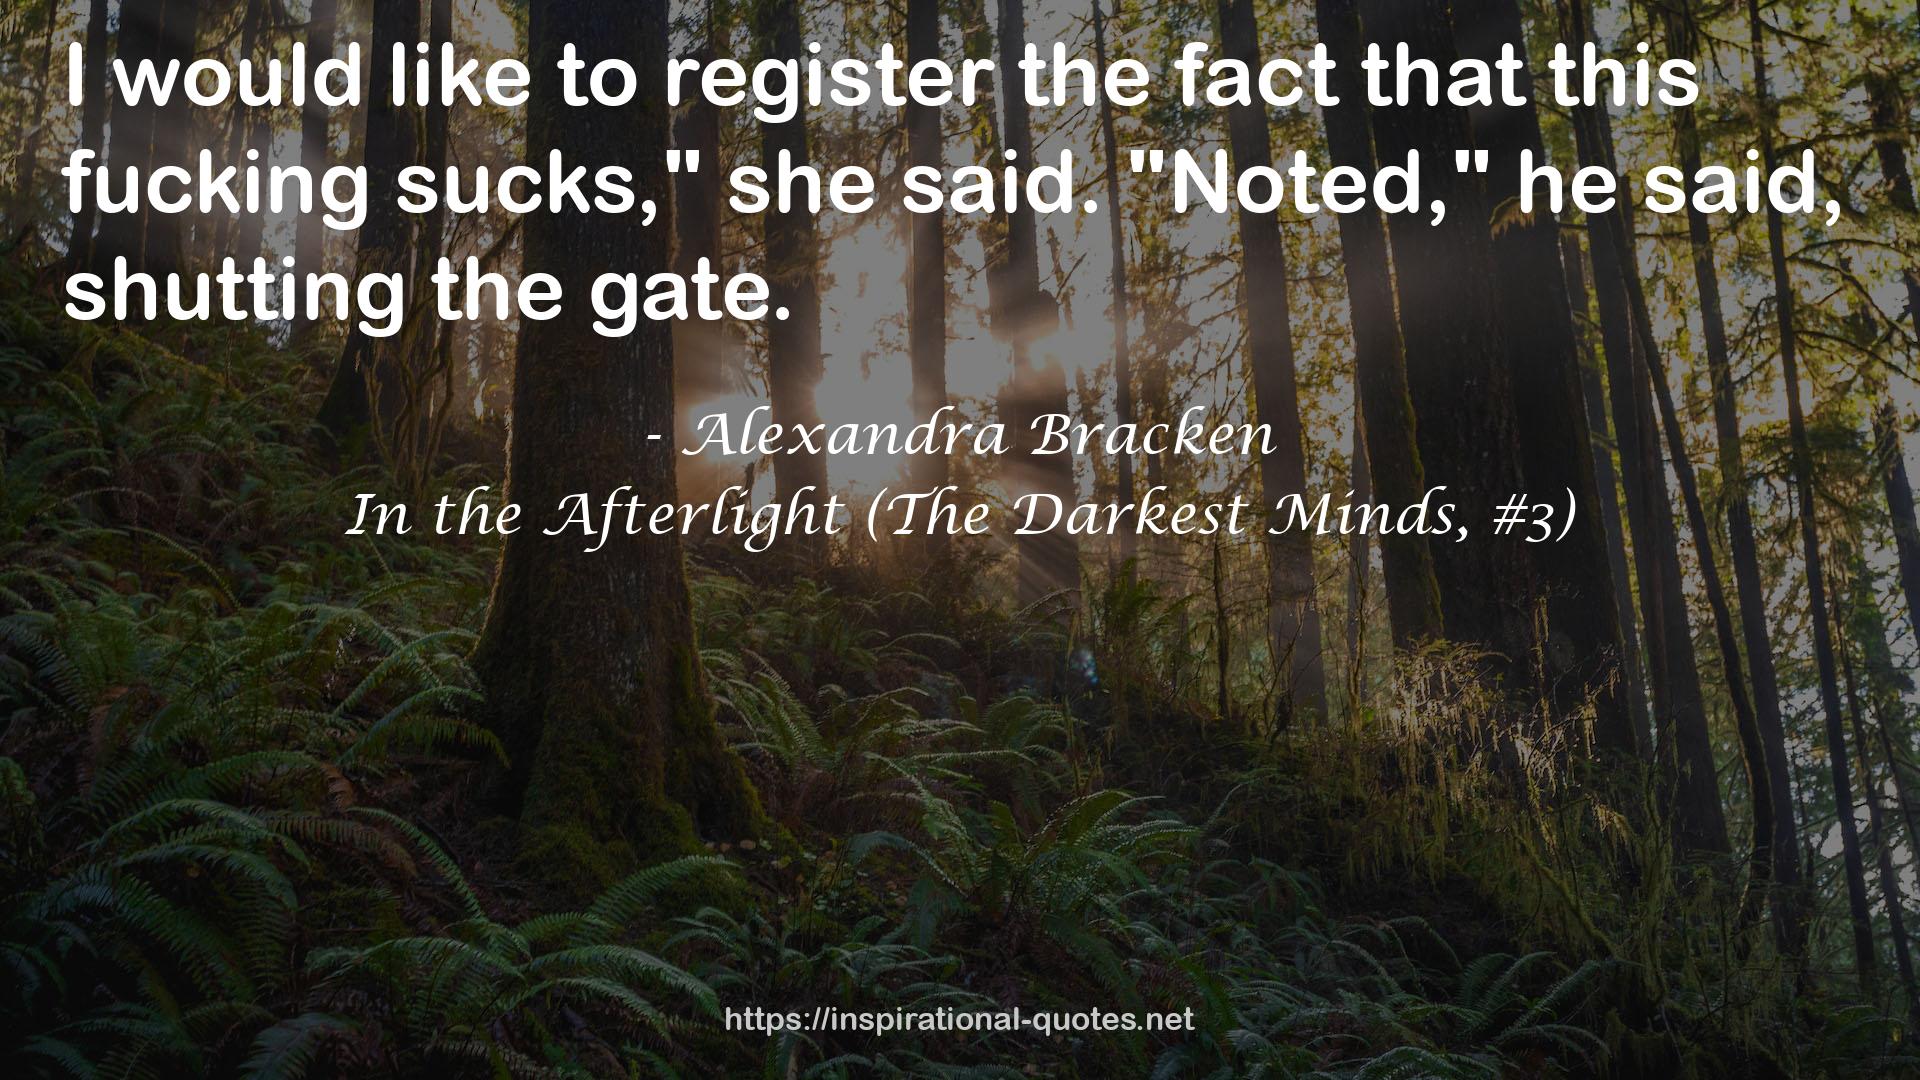 In the Afterlight (The Darkest Minds, #3) QUOTES